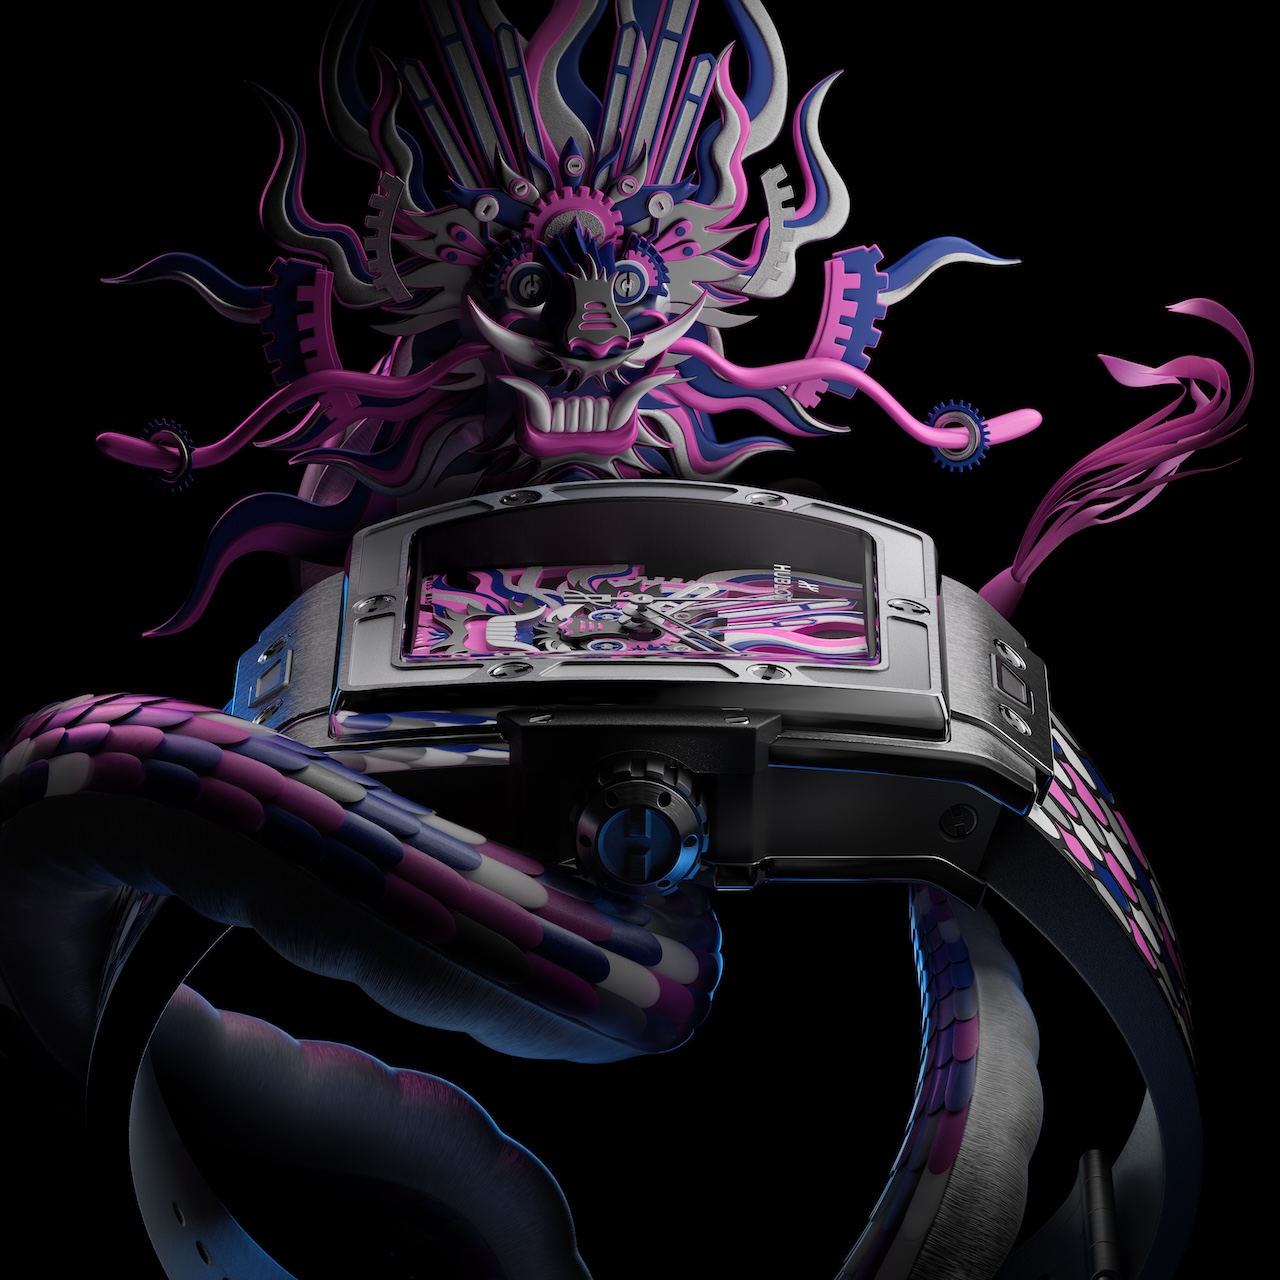 To mark the Lunar New Year, Hublot has created an eye-catching rendition of its iconic Big Bang, complete with 3D dragon.